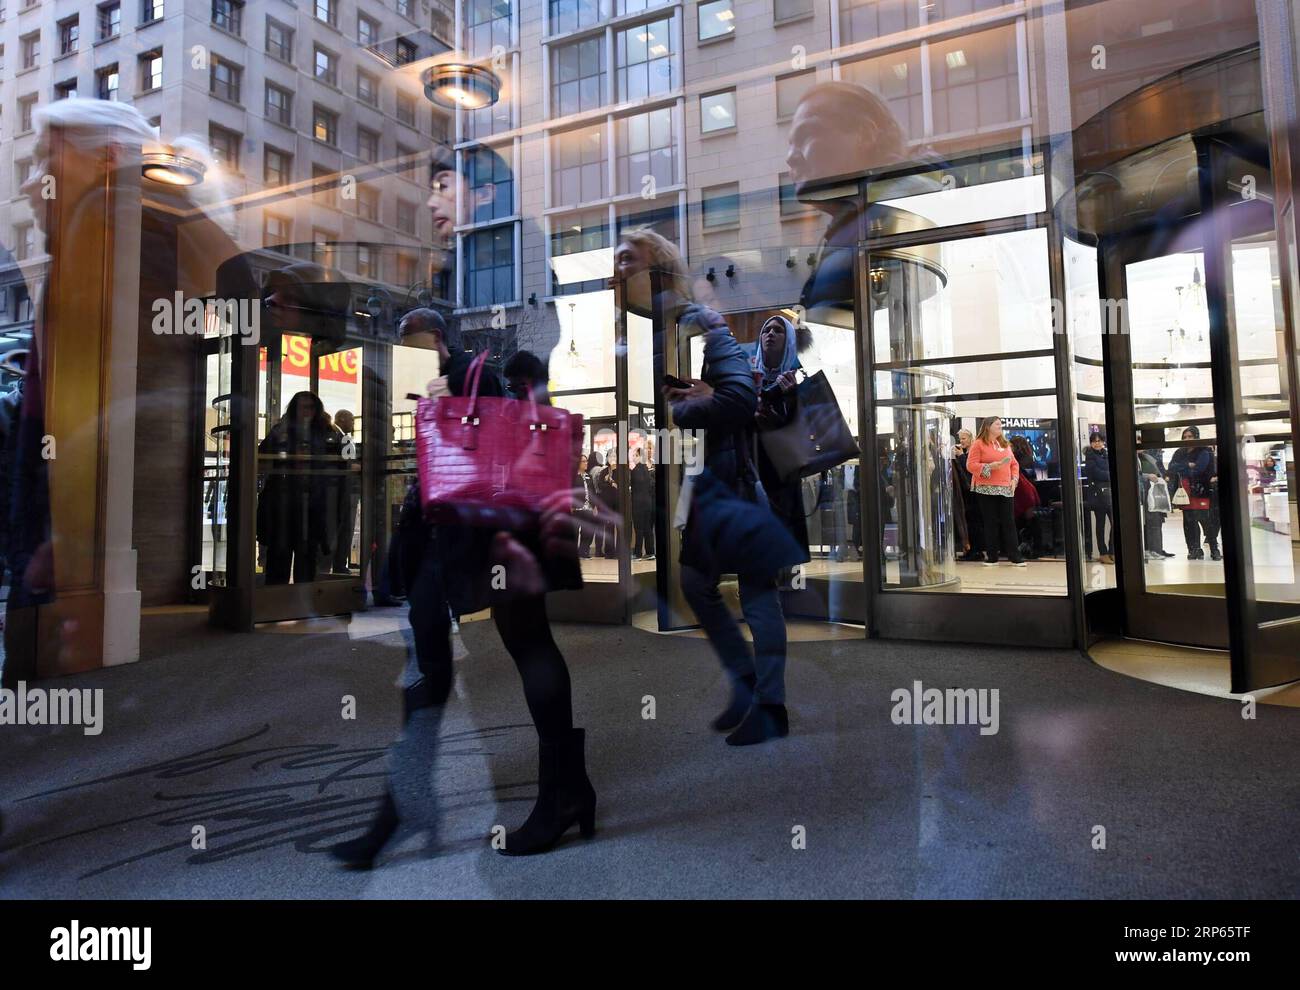 (190103) -- NEW YORK, Jan. 3, 2019 (Xinhua) -- People walk out of the flagship store of the famous department store chain Lord & Taylor on Fifth avenue in Manhattan, New York, the United States, Jan. 2, 2019. The famous department store chain Lord & Taylor officially closed its flagship store on Fifth avenue in Manhattan, New York City. (Xinhua/Li Rui) U.S.-NEW YORK-LORD&TAYLOR-FLAGSHIP STORE-CLOSE PUBLICATIONxNOTxINxCHN Stock Photo